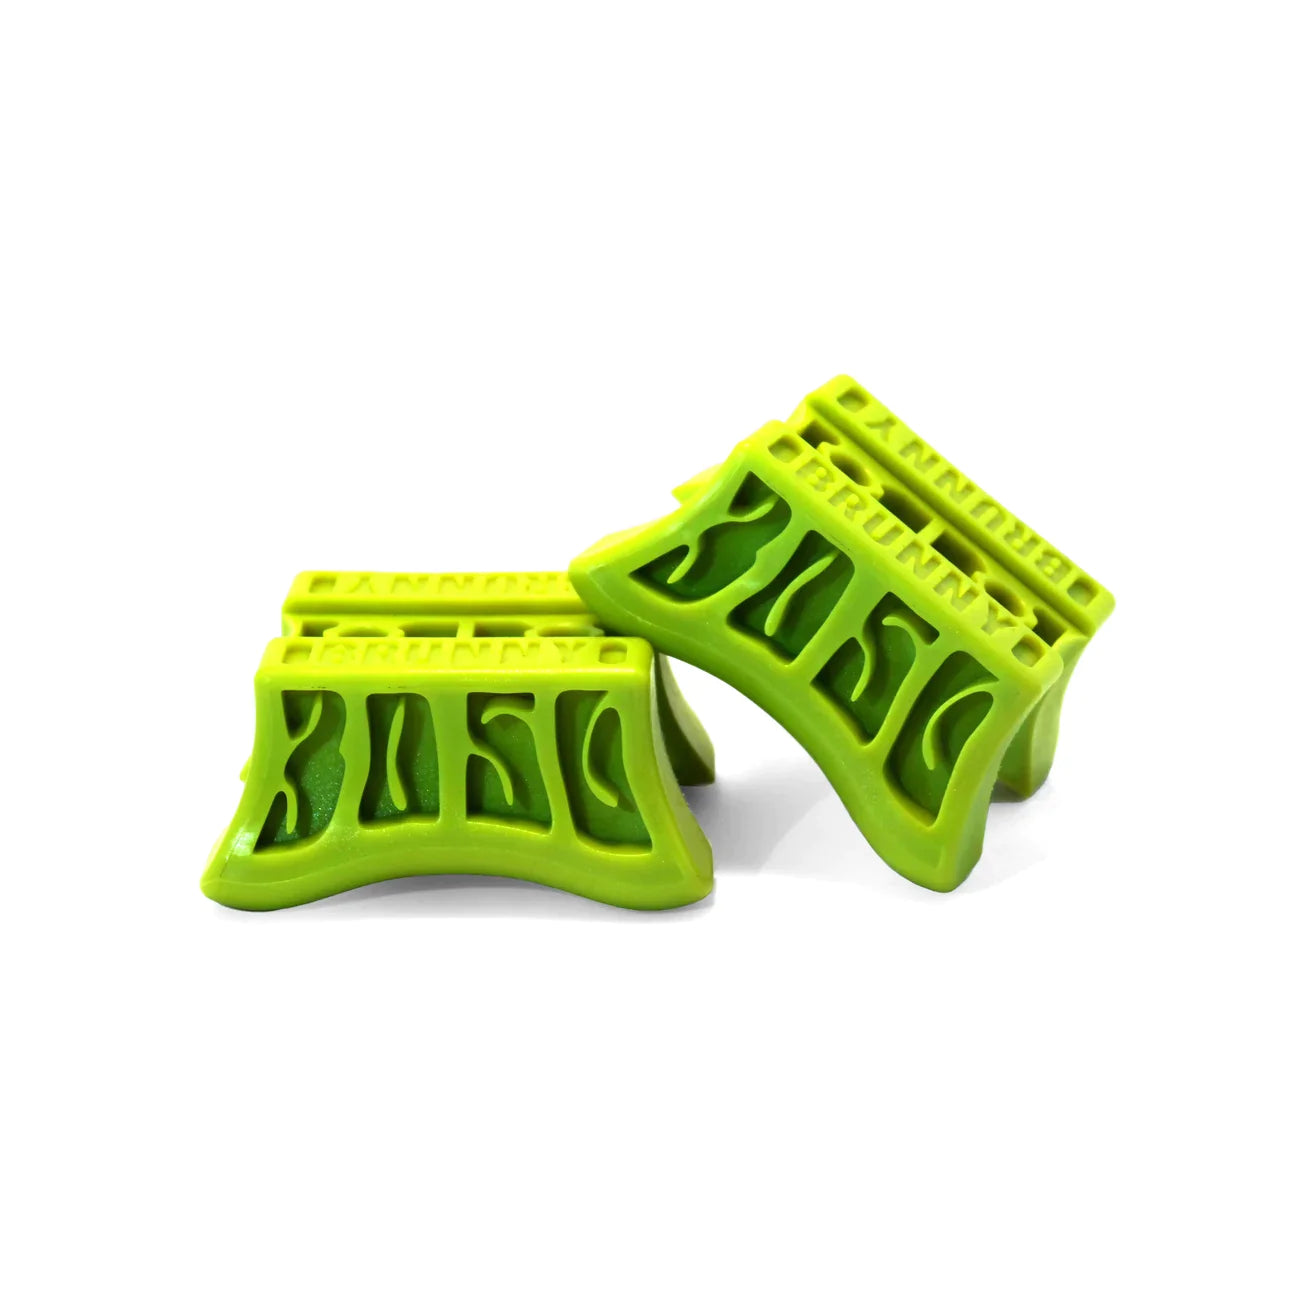 Come and get your Green Brunny's Slide Blocks. These slide blocks are hotter than our Las Vegas summers. Stop by our Las Vegas, Downtown location or buy them online.